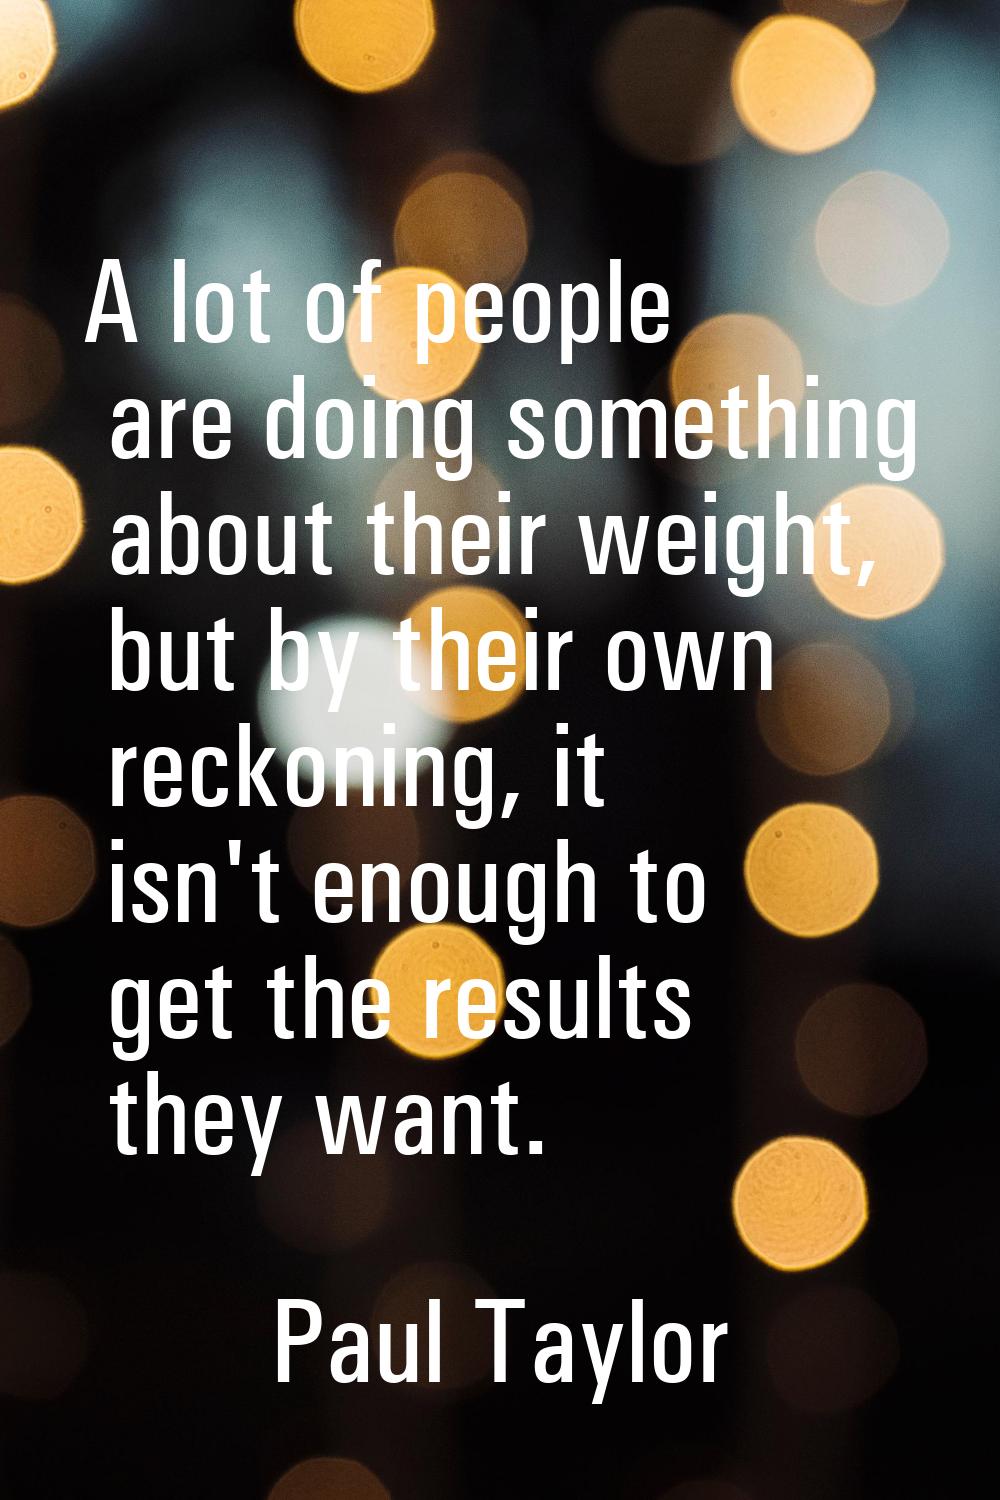 A lot of people are doing something about their weight, but by their own reckoning, it isn't enough